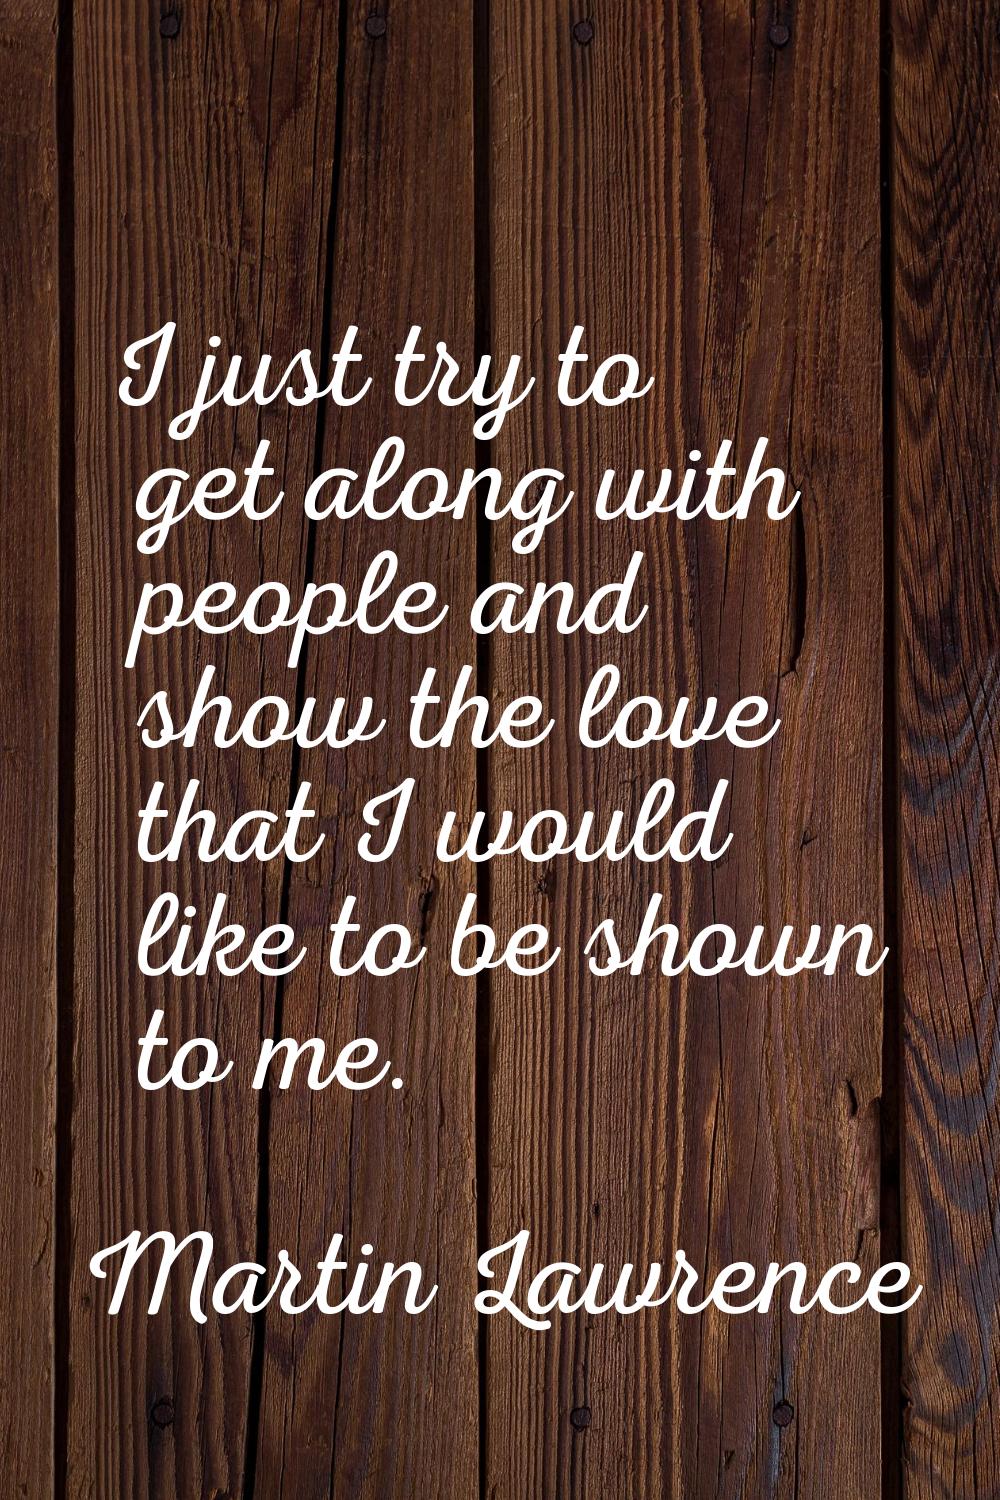 I just try to get along with people and show the love that I would like to be shown to me.